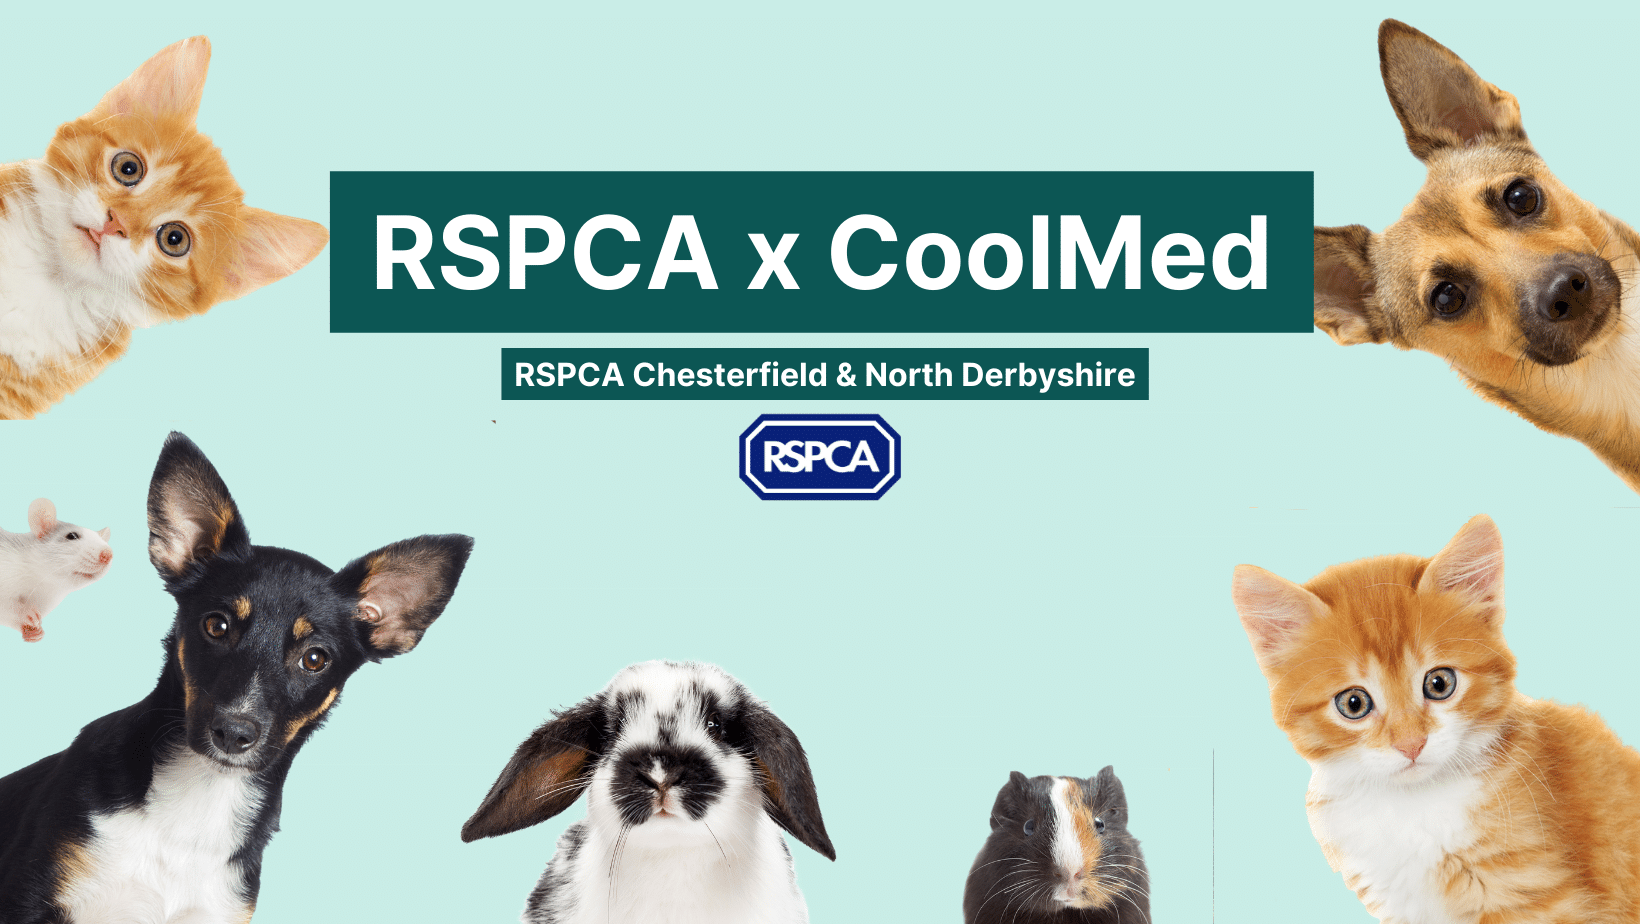 CoolMed veterinary fridges are being used by RSPCA Chesterfield & North Derbyshire